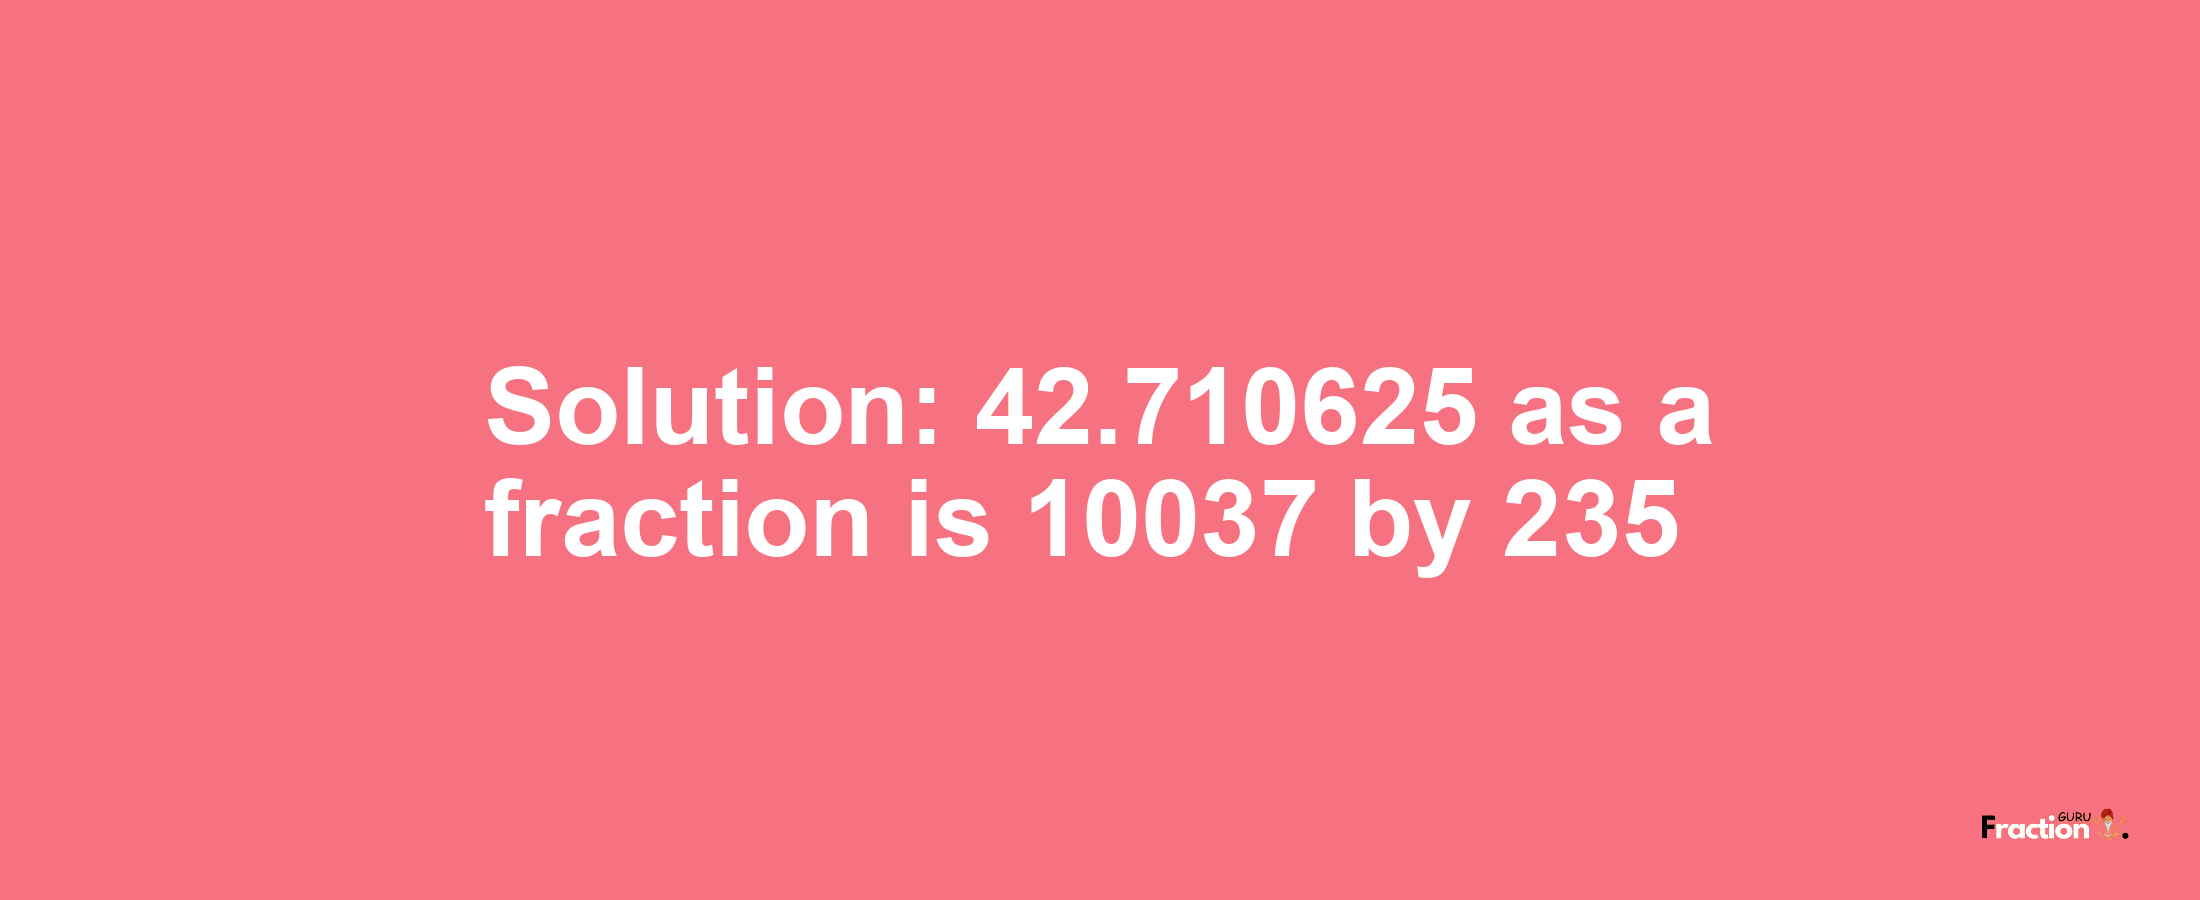 Solution:42.710625 as a fraction is 10037/235